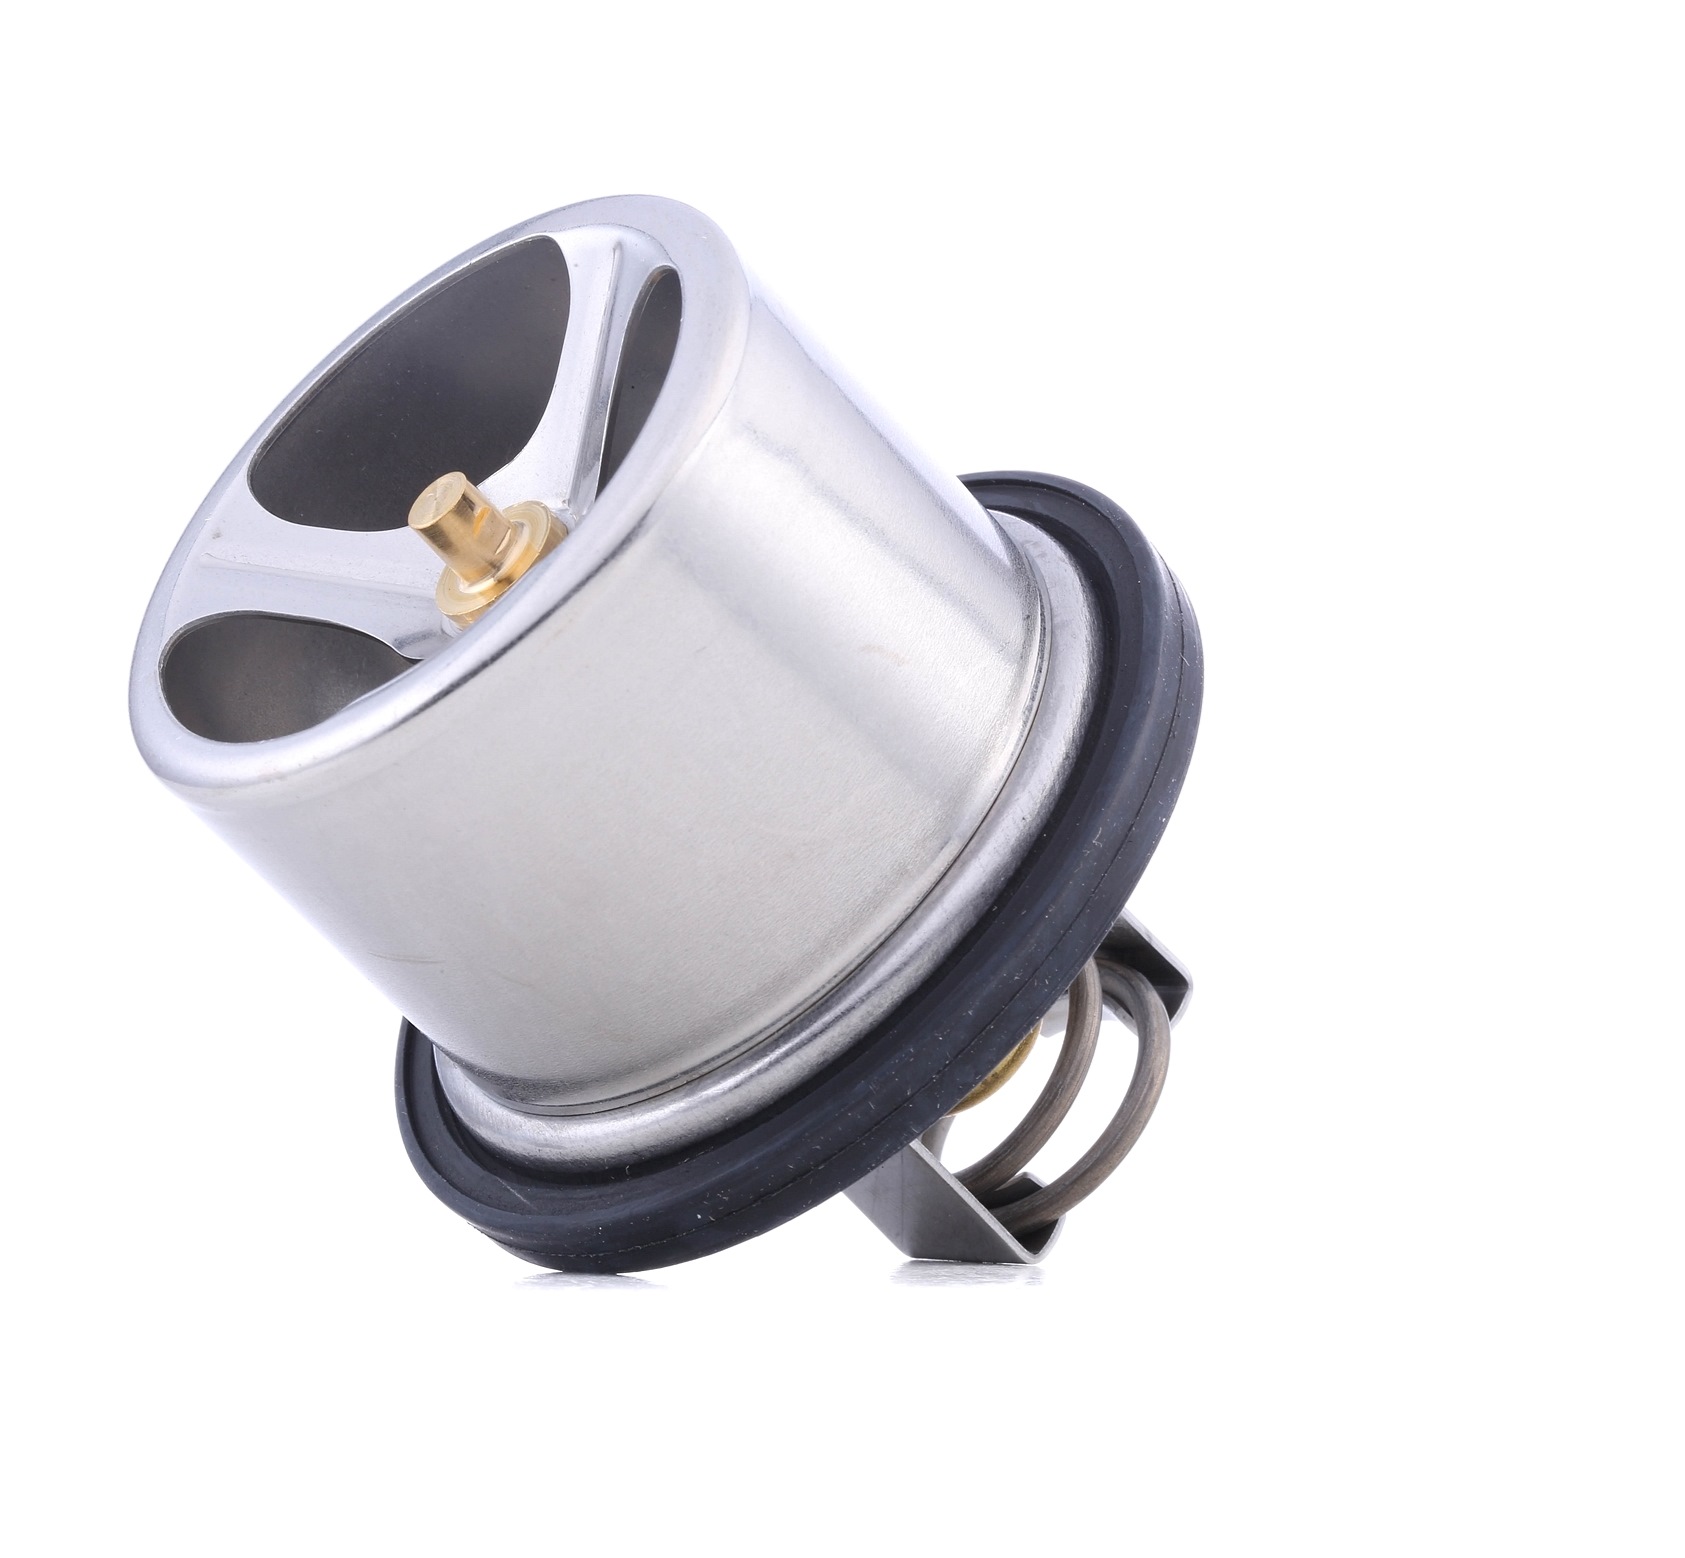 MAHLE ORIGINAL THD 1 79 Engine thermostat Opening Temperature: 79°C, with seal